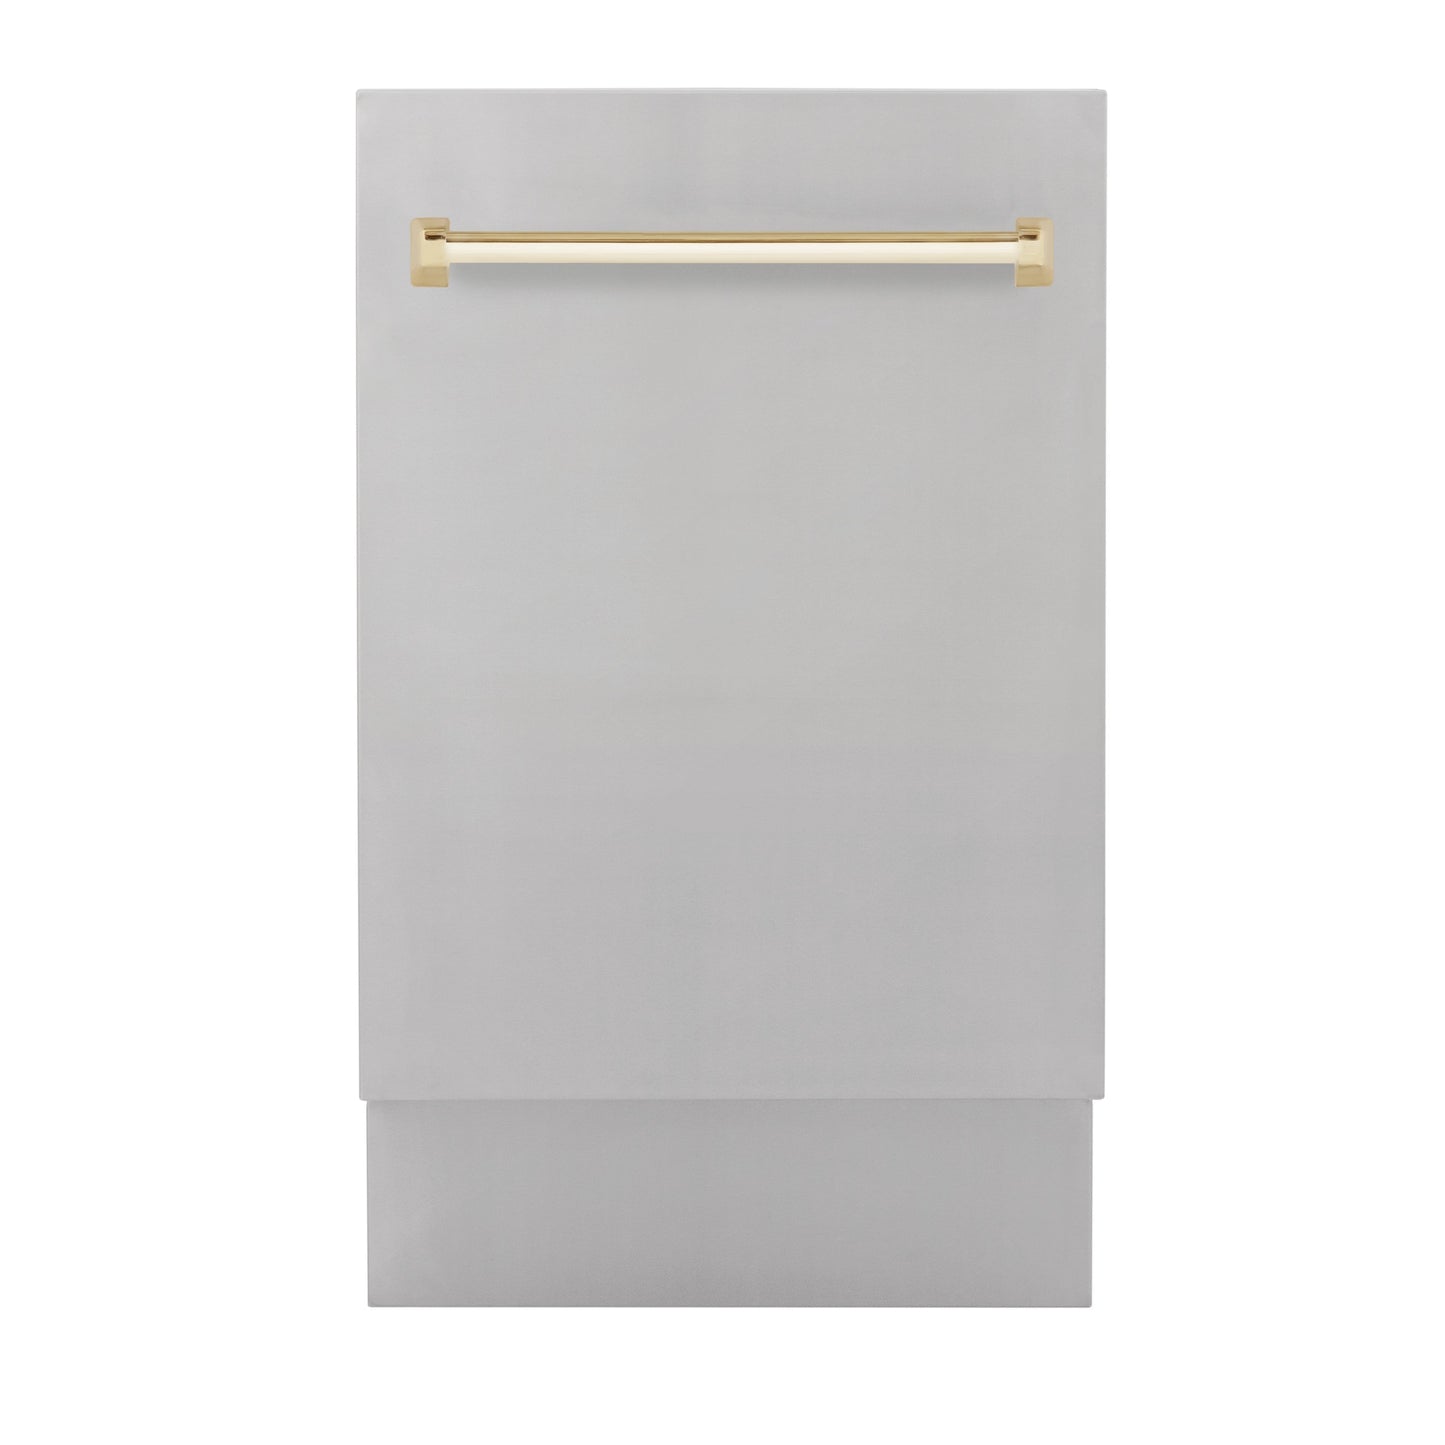 ZLINE Autograph Edition 18” Compact 3rd Rack Top Control Dishwasher in Stainless Steel with Polished Gold Handle, 51dBa (DWVZ-304-18-G)